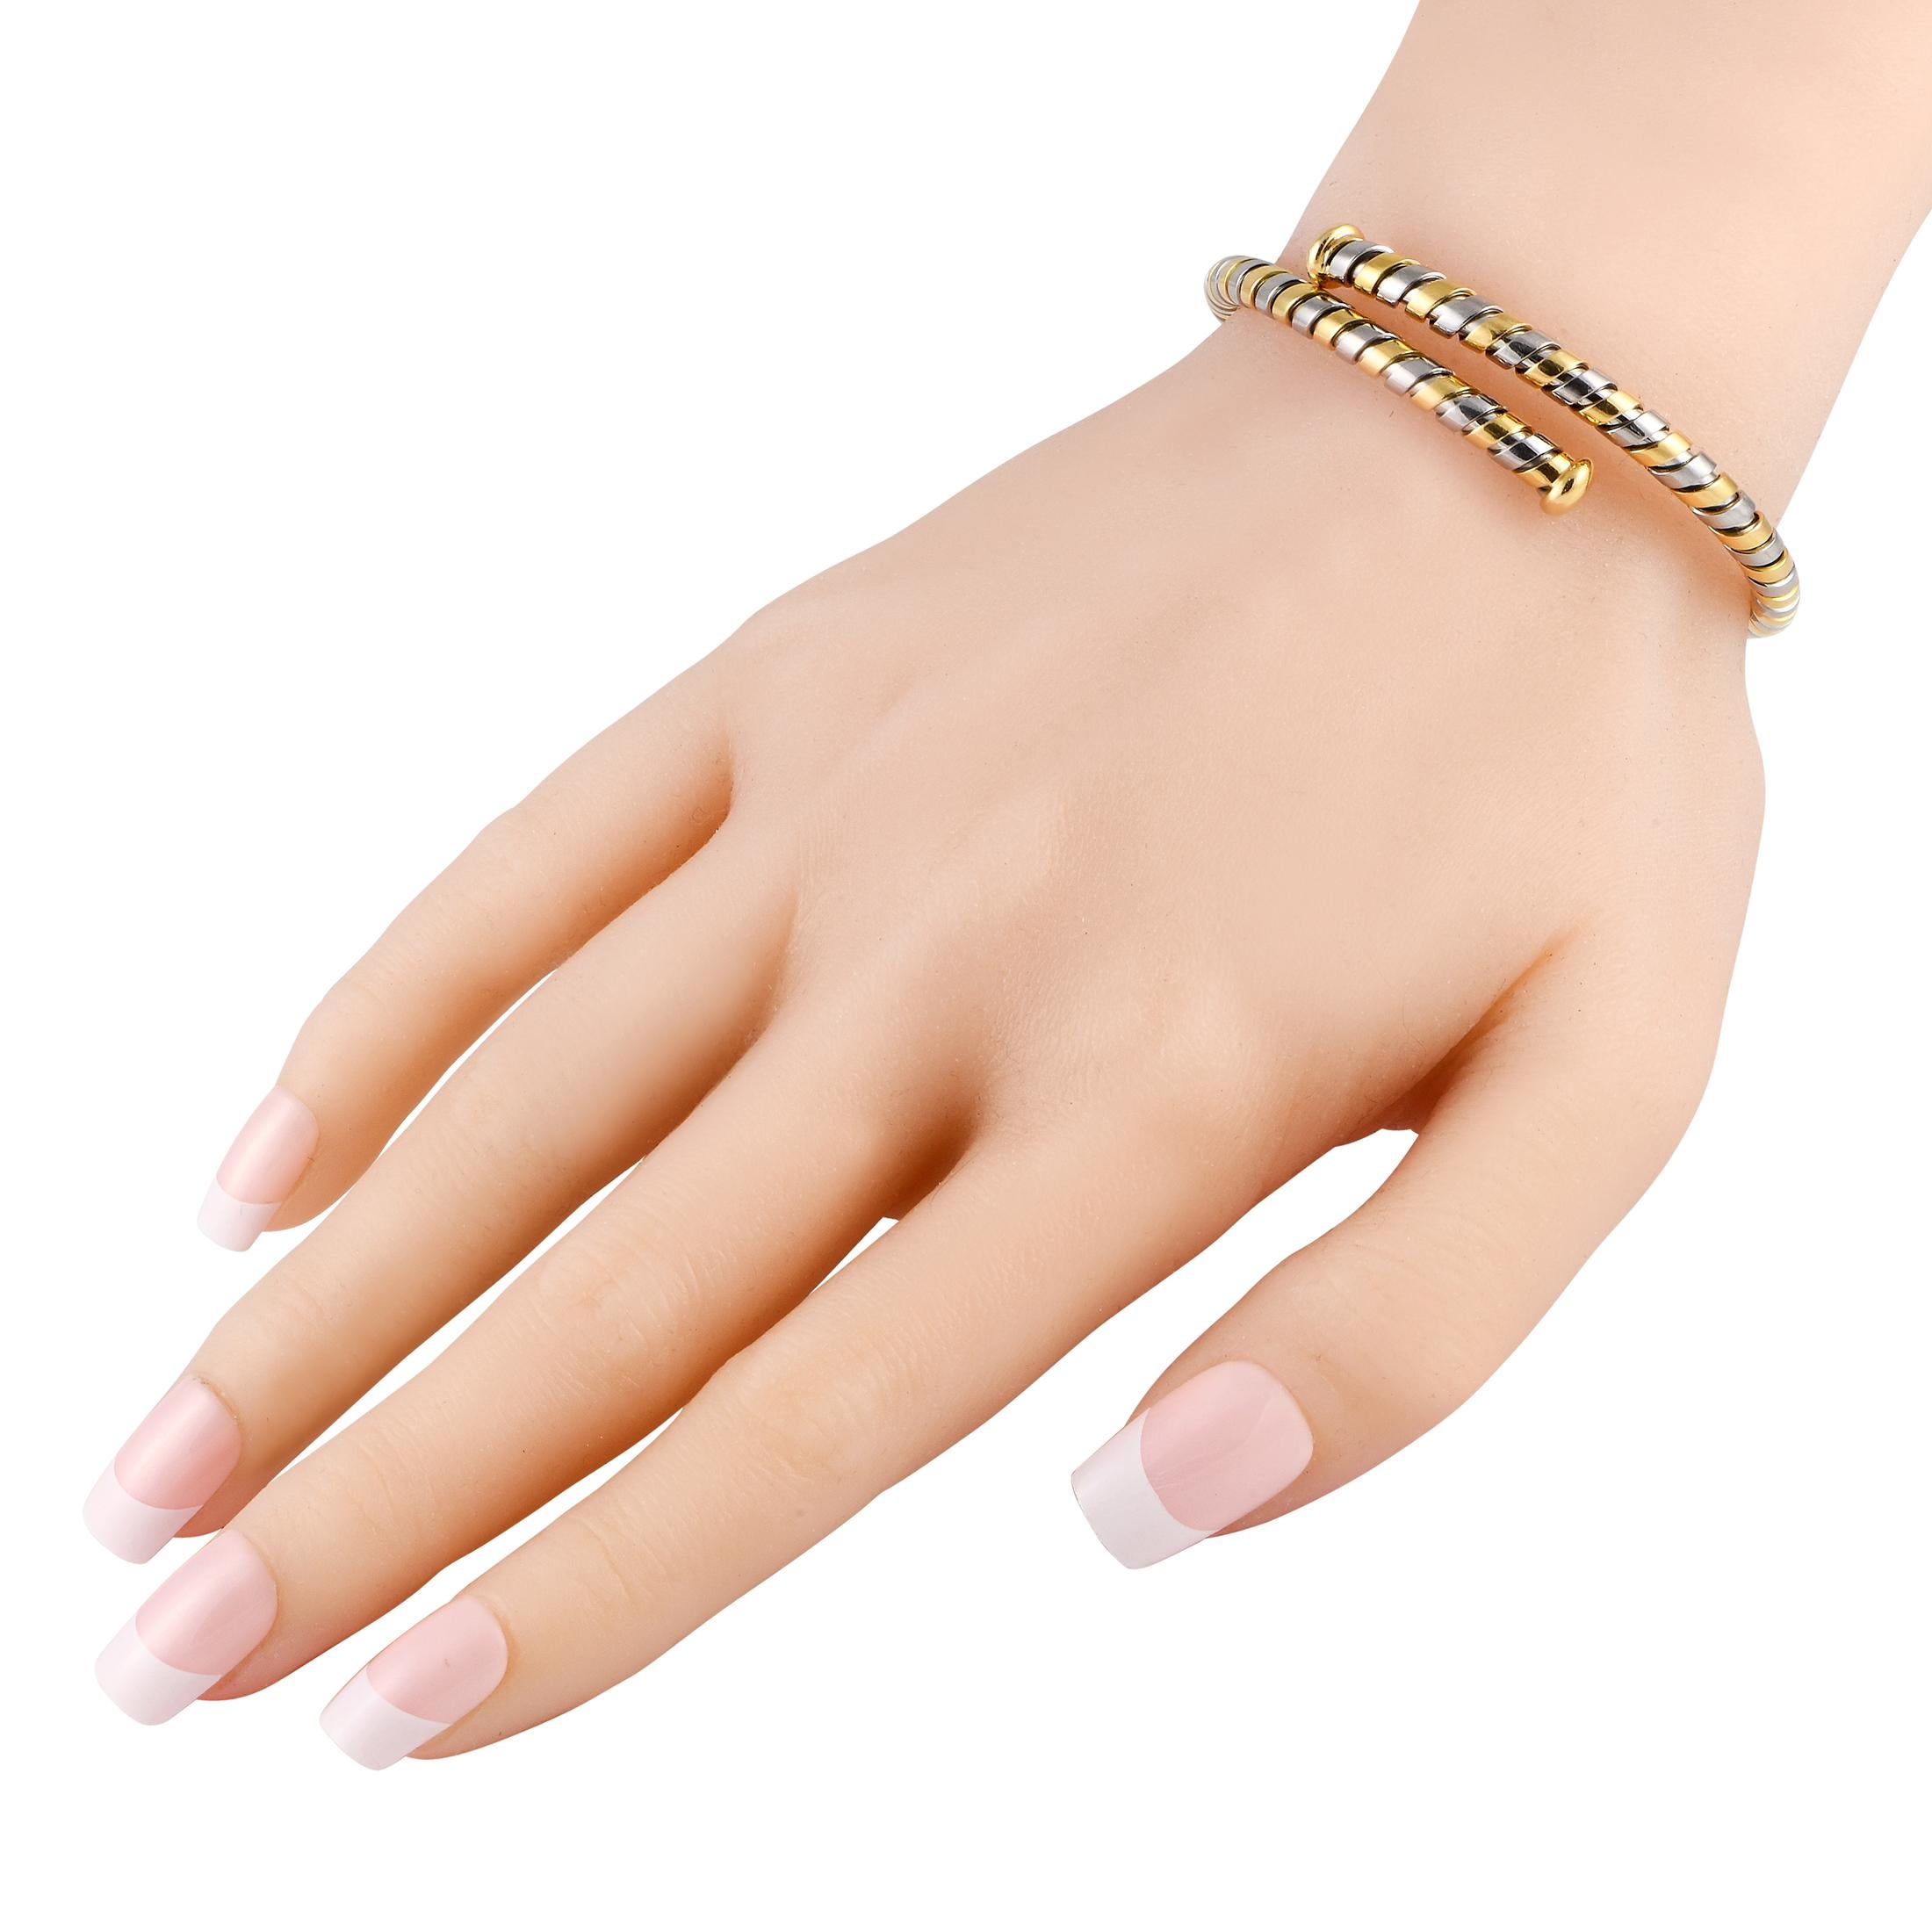 This is a classic Bvlgari jewel featuring their signature Tubogas style. It is a bangle bracelet that coils around the wrist, made of a combination of stainless steel and 18K yellow gold. The bracelet measures 6.28 and weighs 17 grams.This Bvlgari